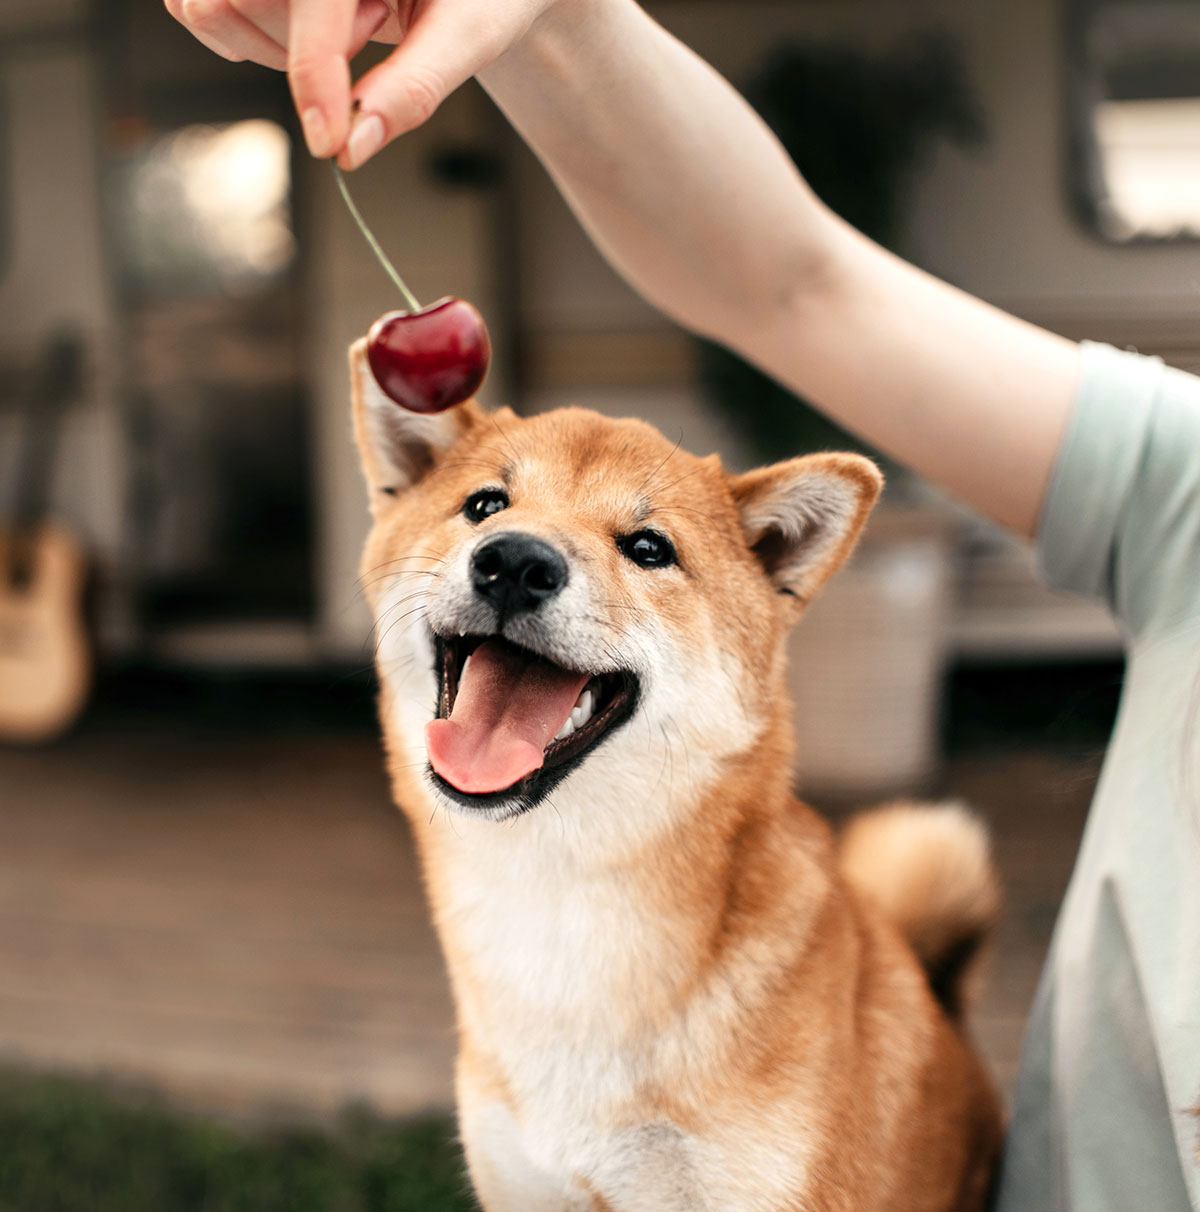 Dog eating a cherry.